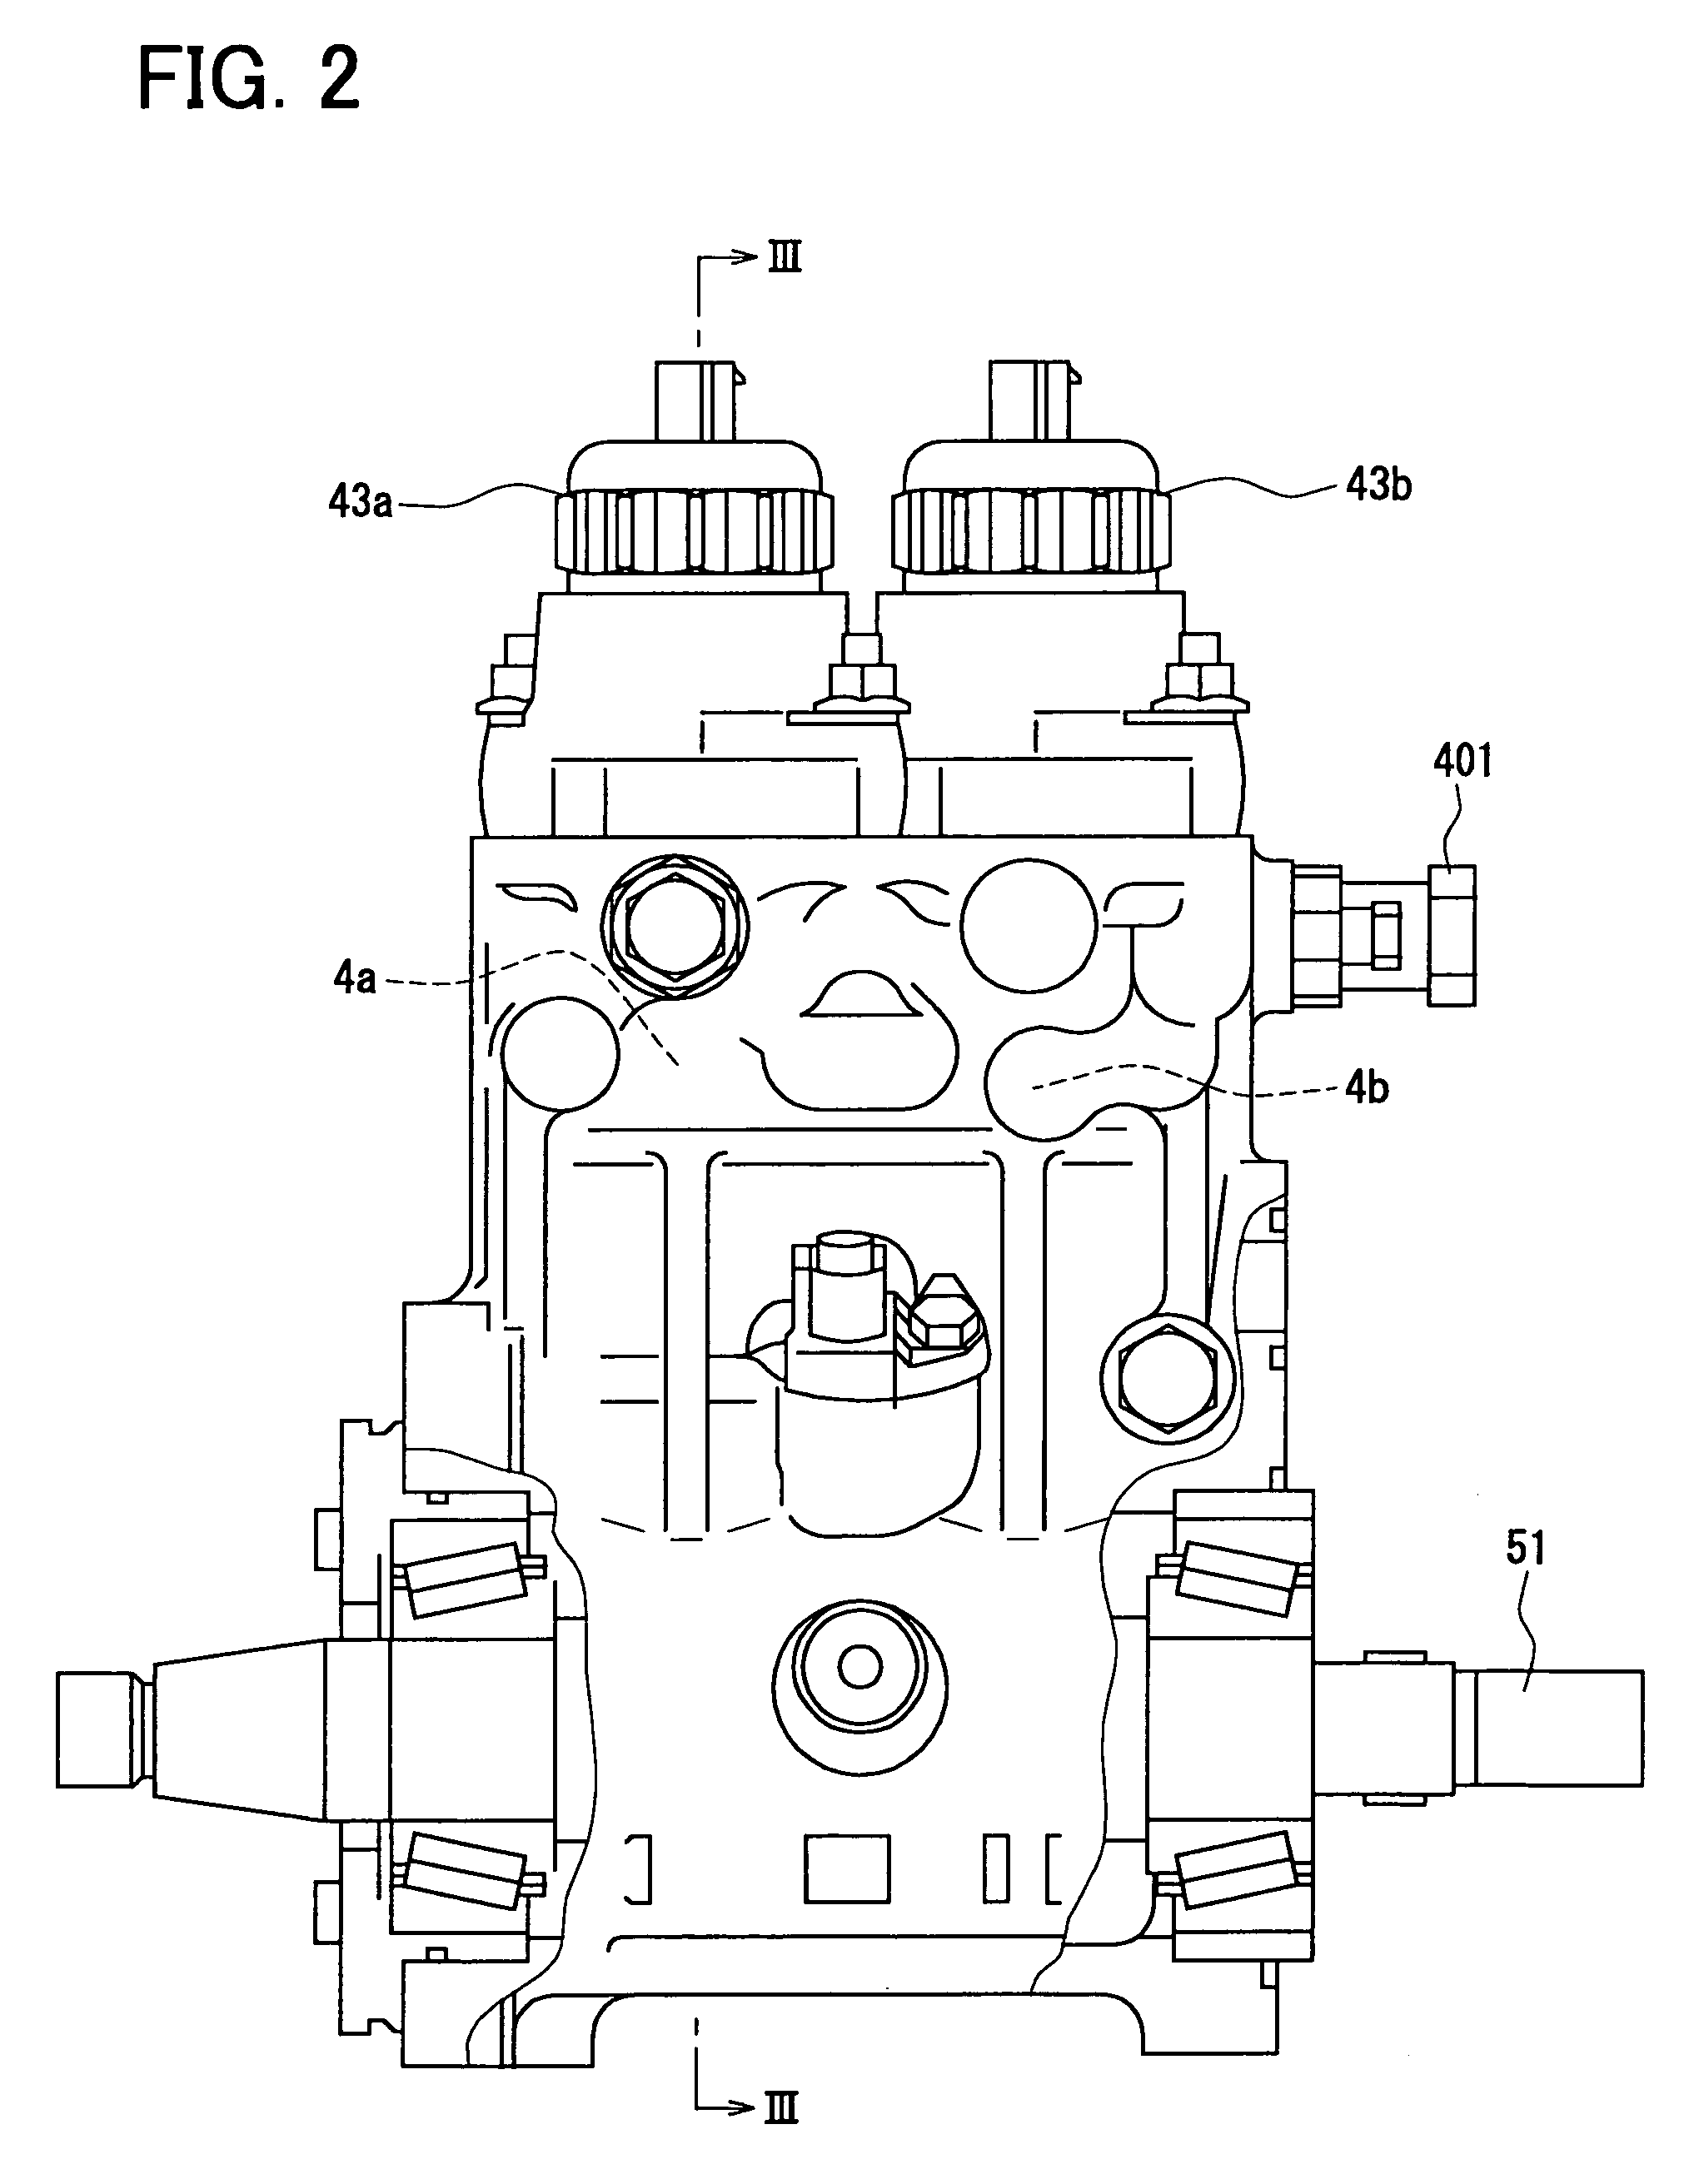 Fuel supply device of an internal combustion engine